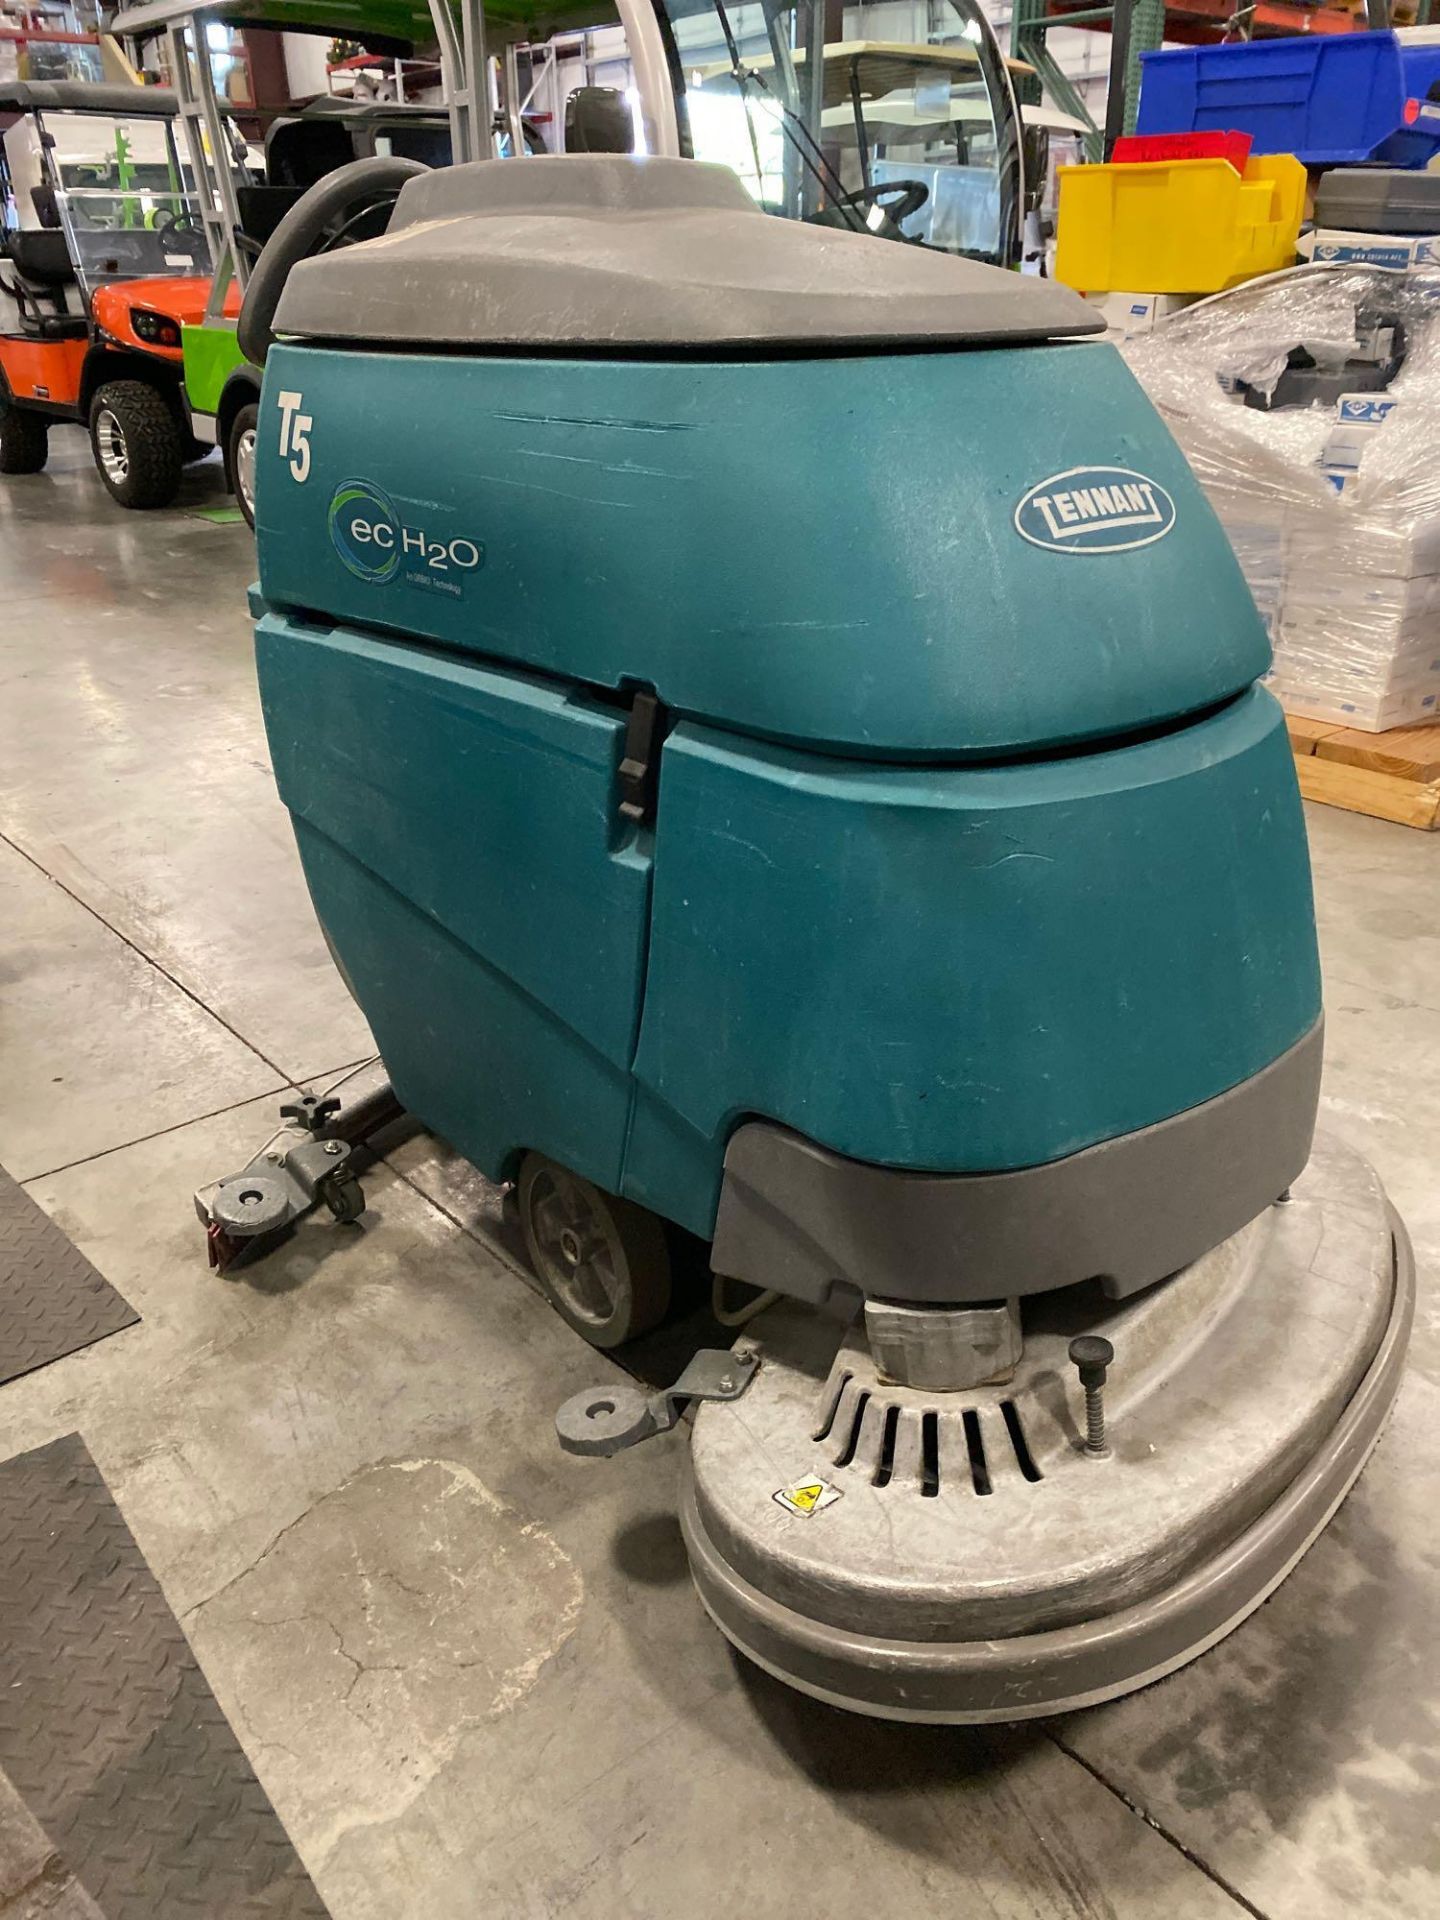 2014 TENNANT T5 ECHO FLOOR SCRUBBER, BUILT IN BATTERY CHARGER - Image 2 of 4